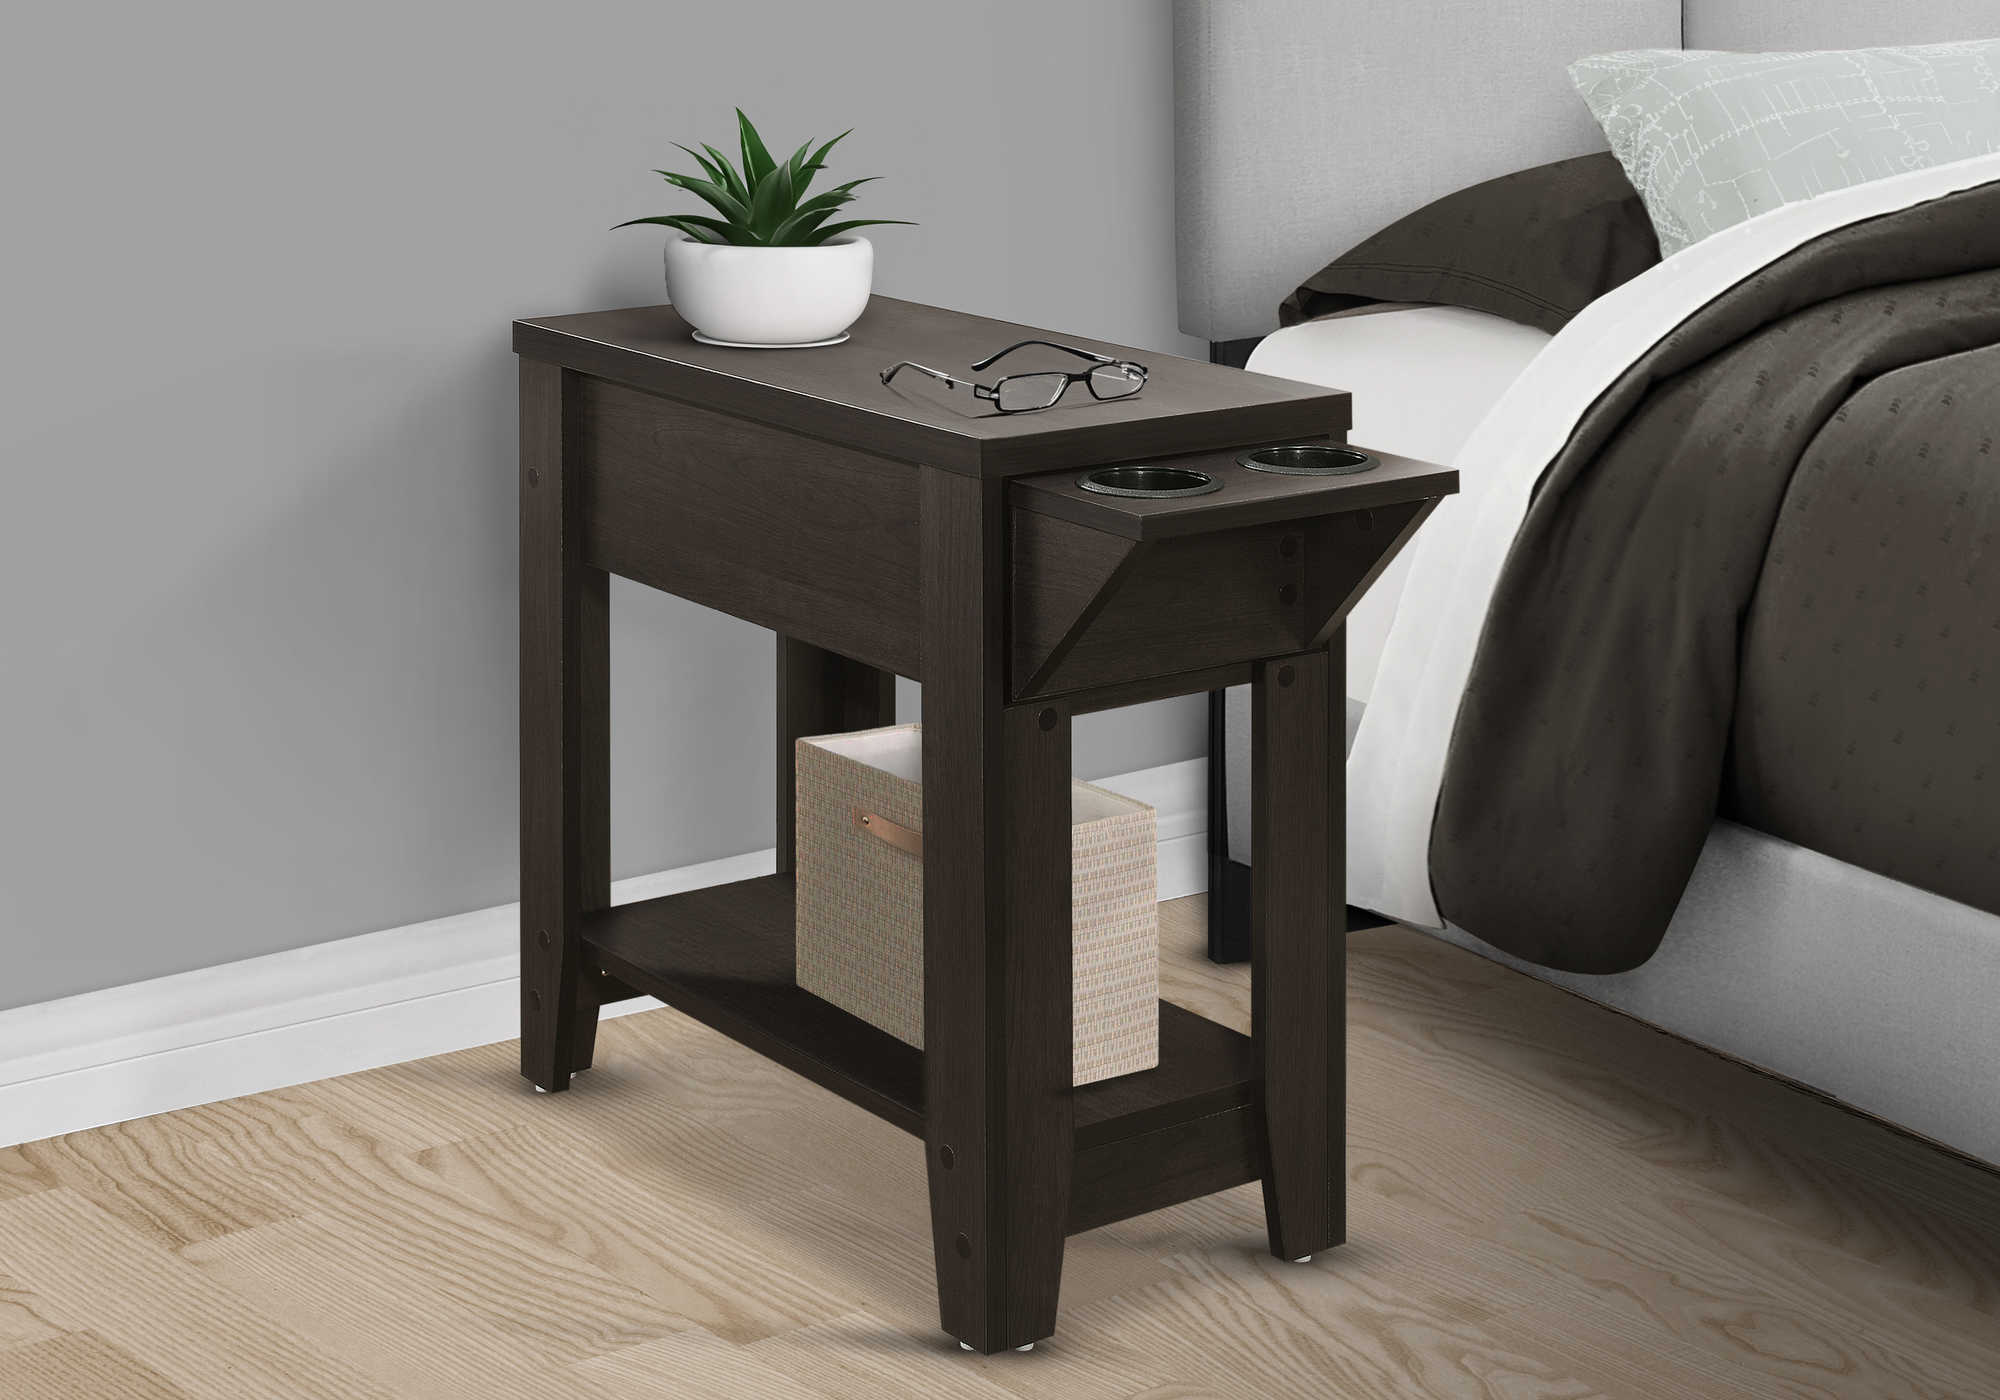 NIGHTSTAND - 23"H / ESPRESSO WITH A GLASS HOLDER